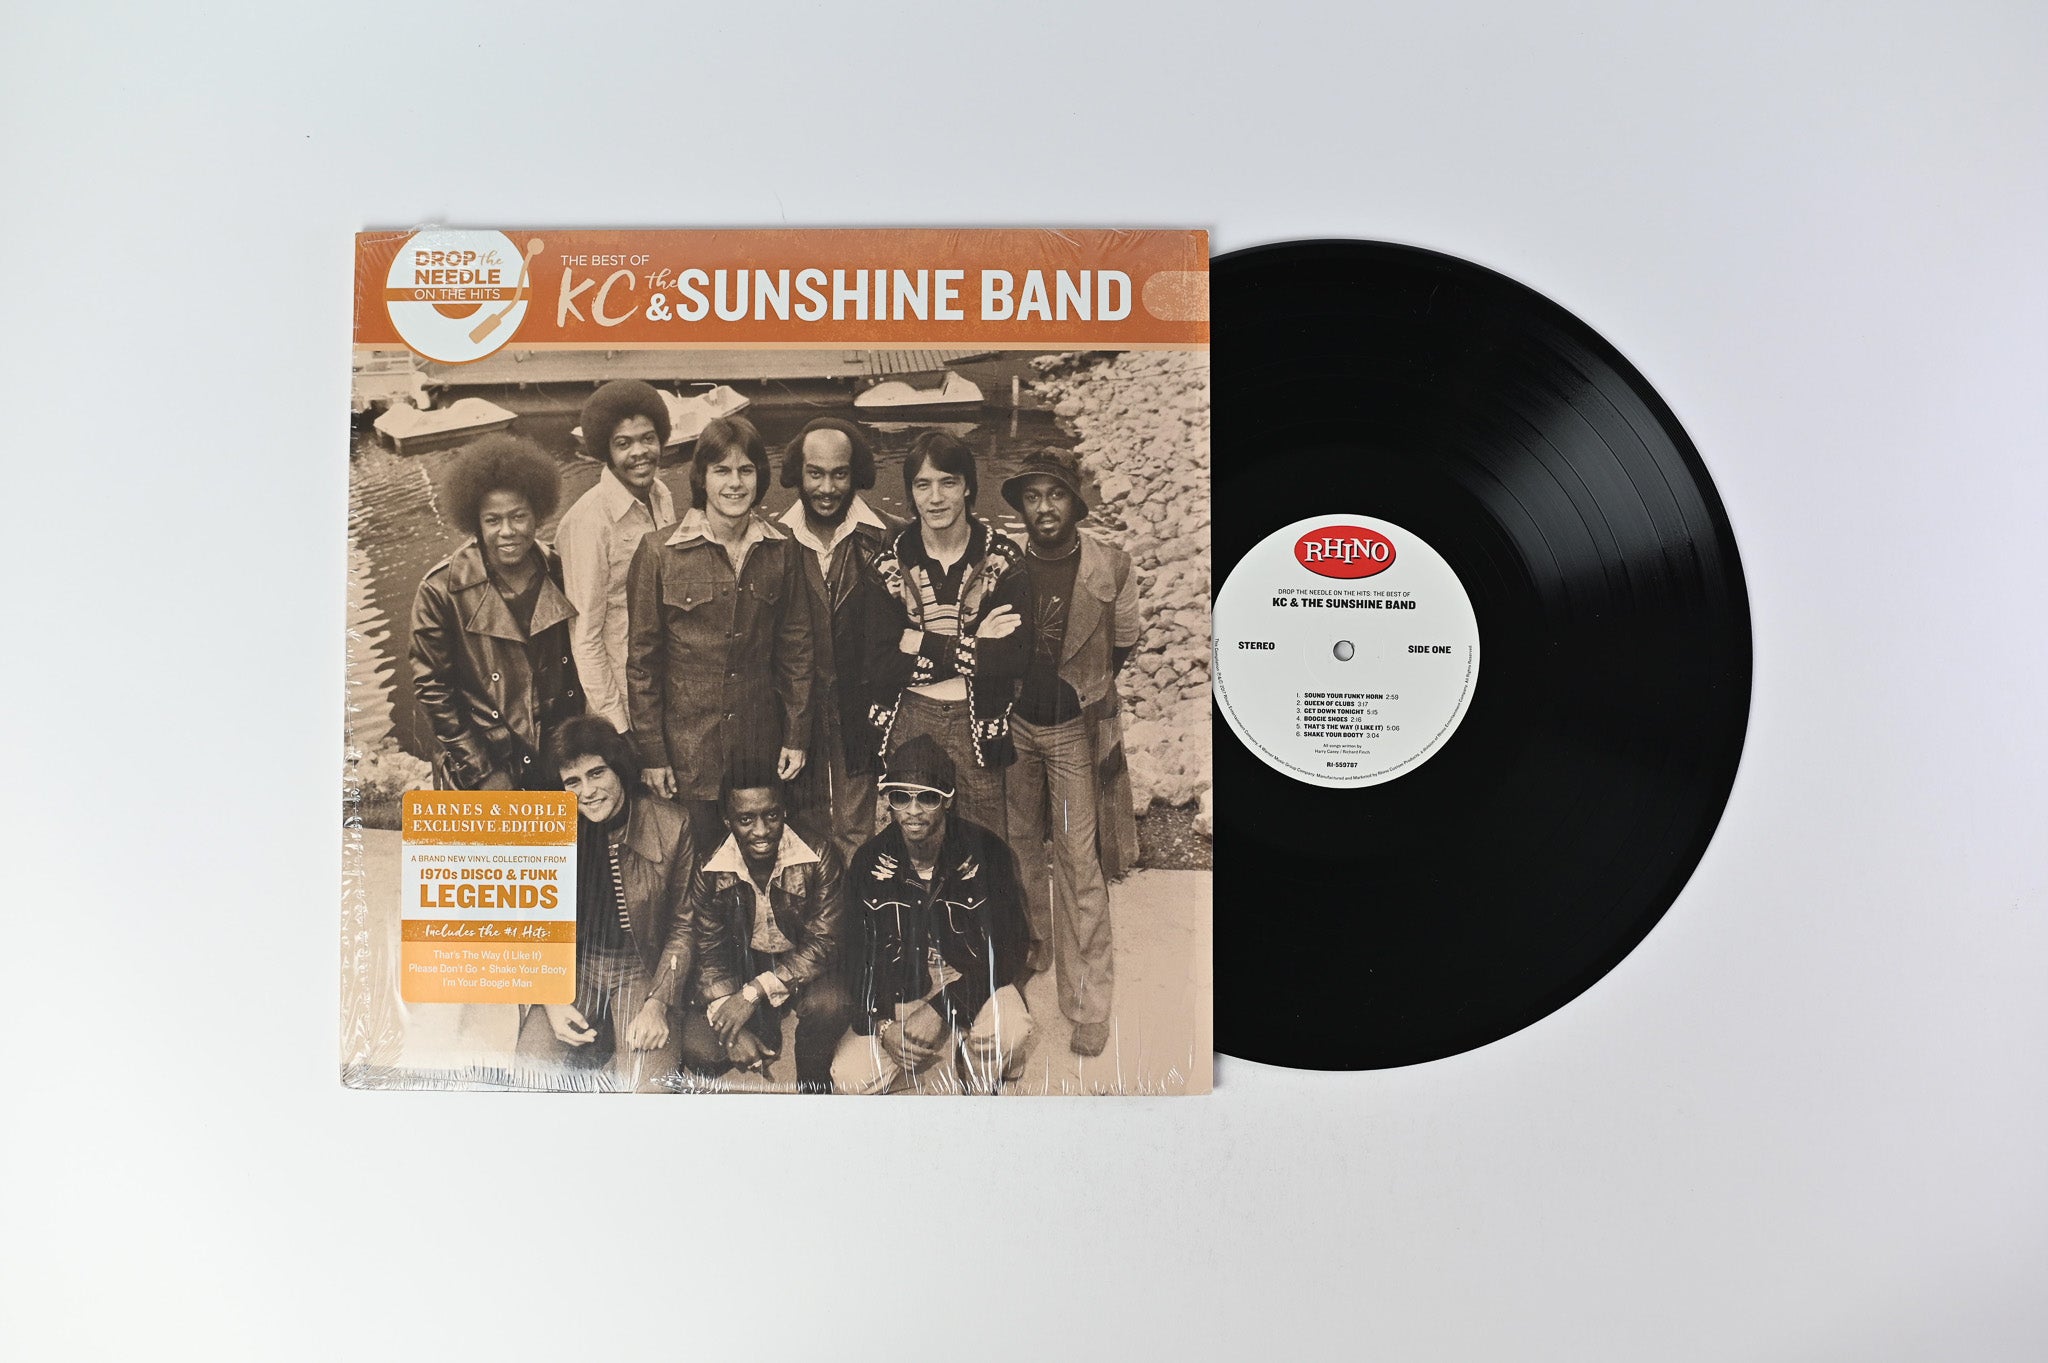 KC & The Sunshine Band - The Best Of KC & the Sunshine Band on Rhino Records